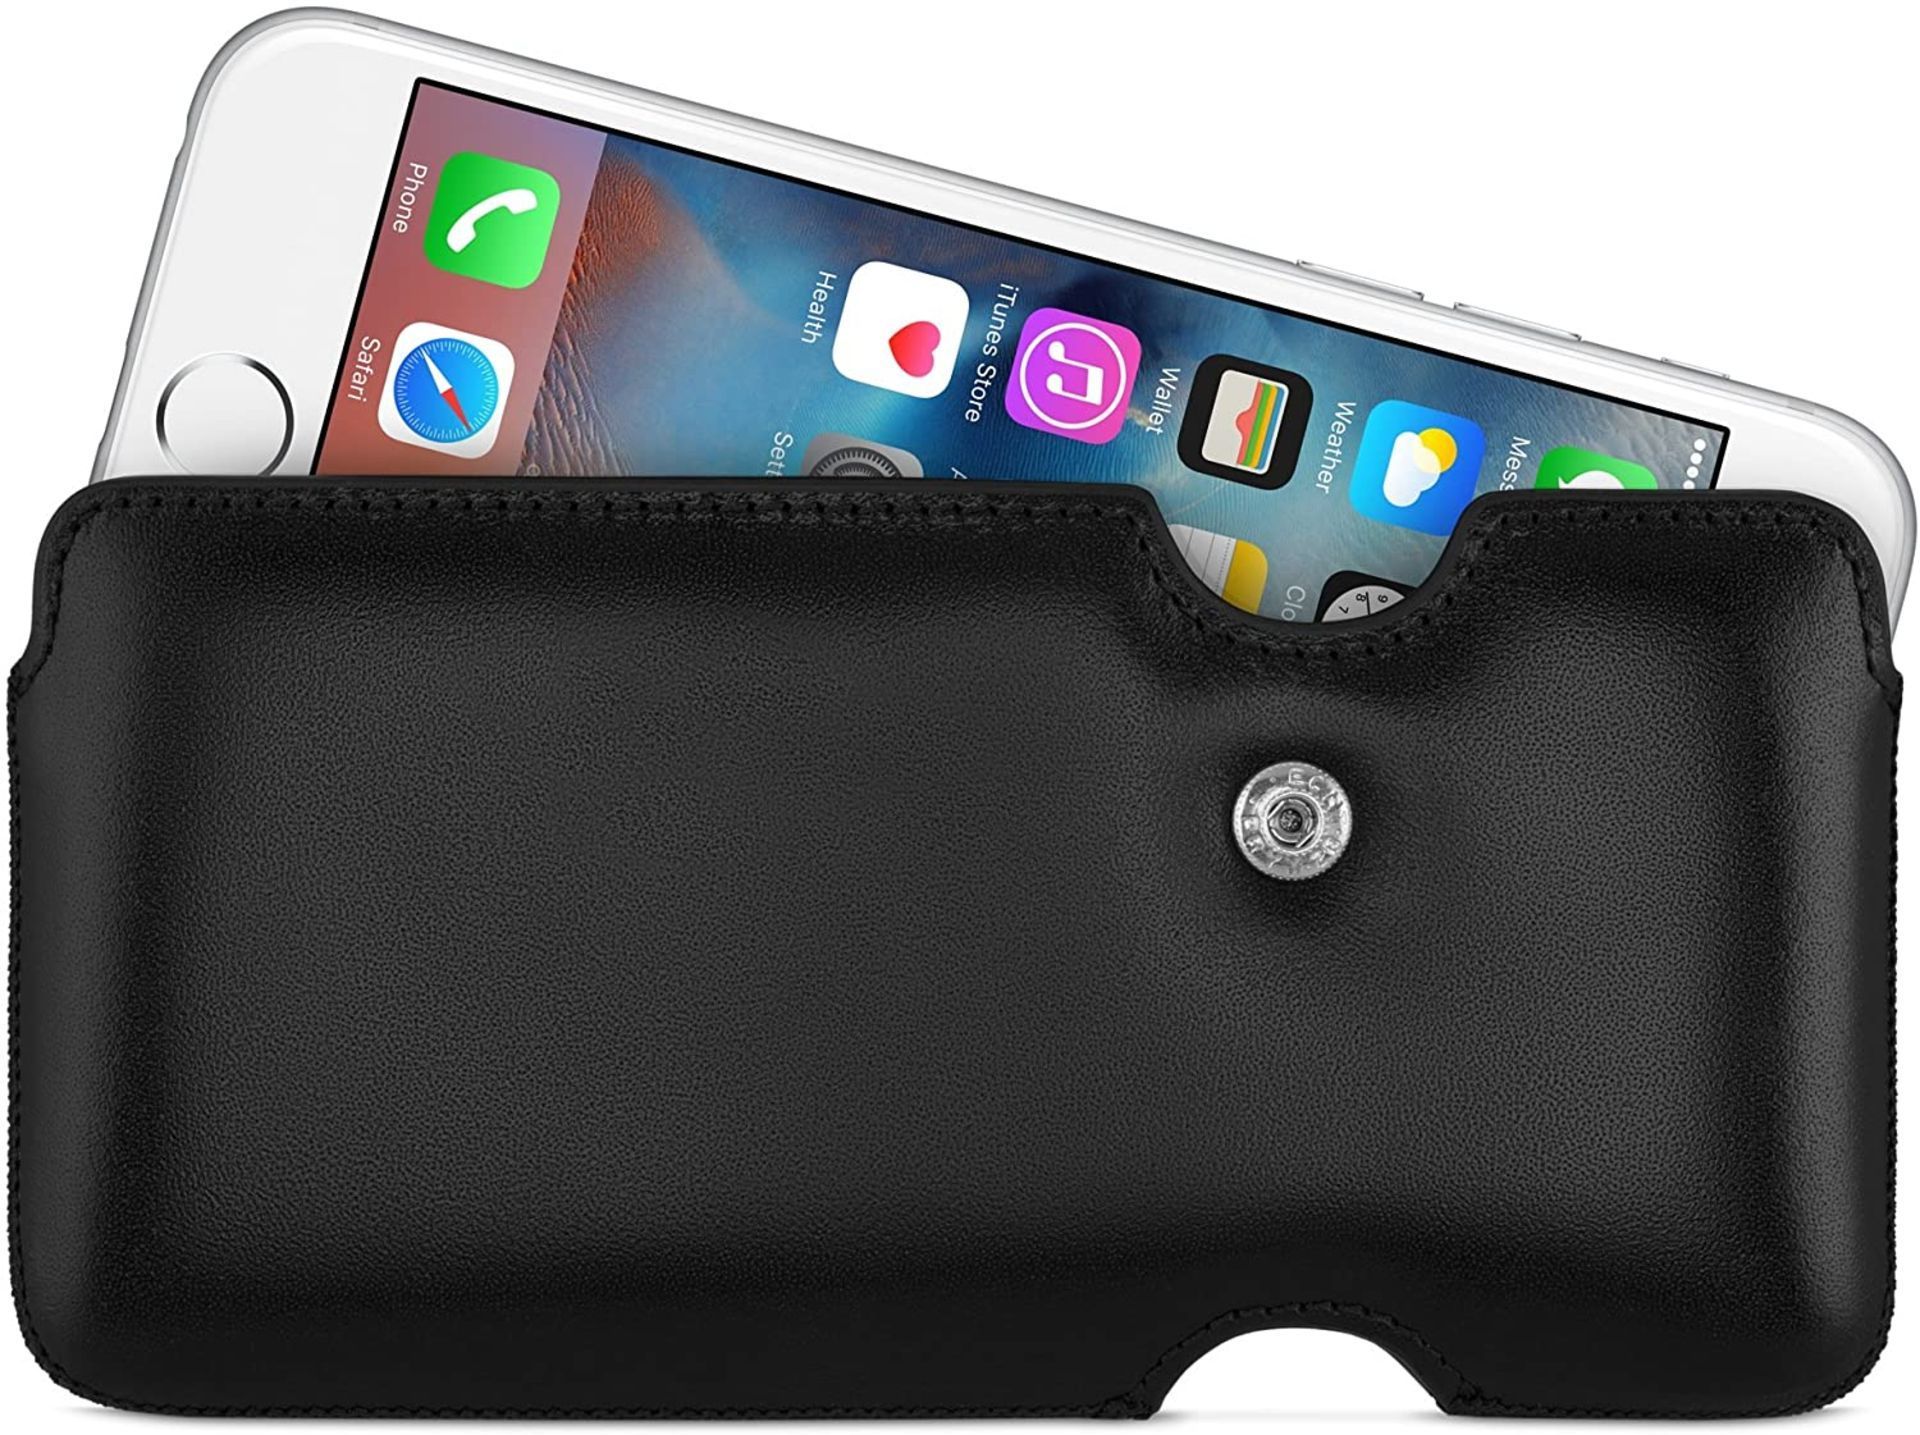 3 x sena laterale genuine leather case for iphone 6,7,8 £39.99 each - Image 3 of 3